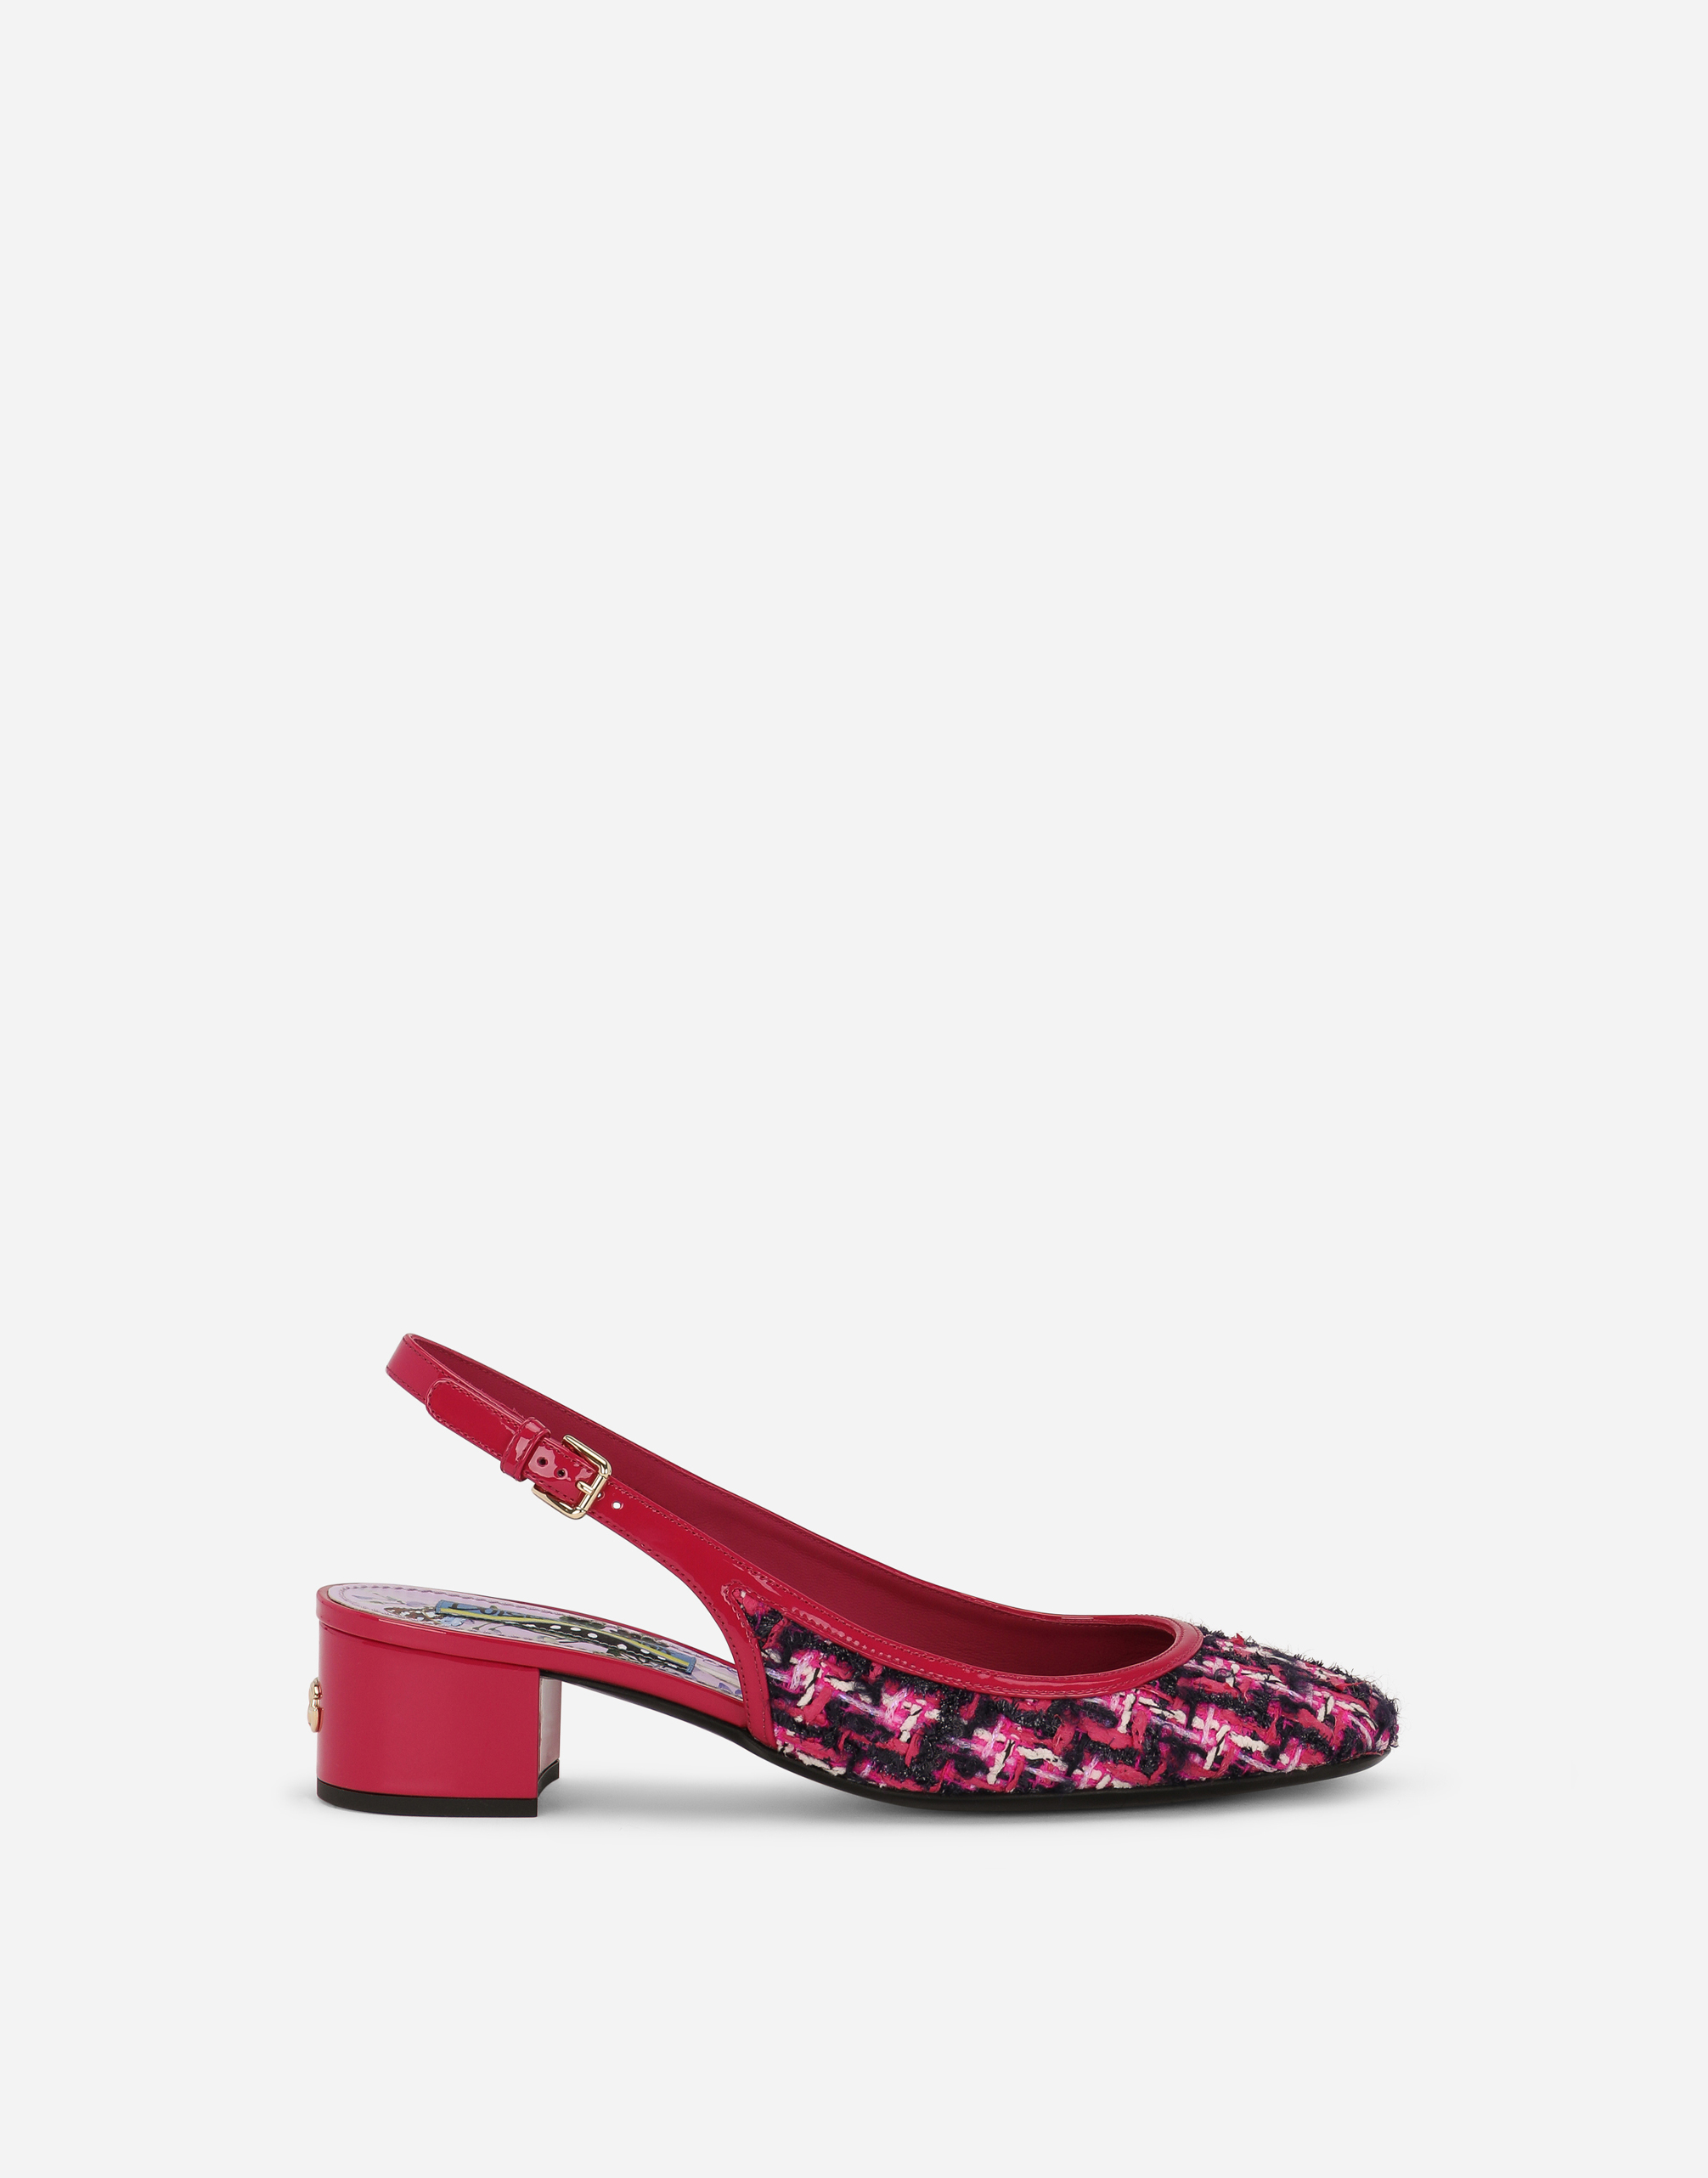 Patent leather and tweed slingbacks with DG logo in Fuchsia